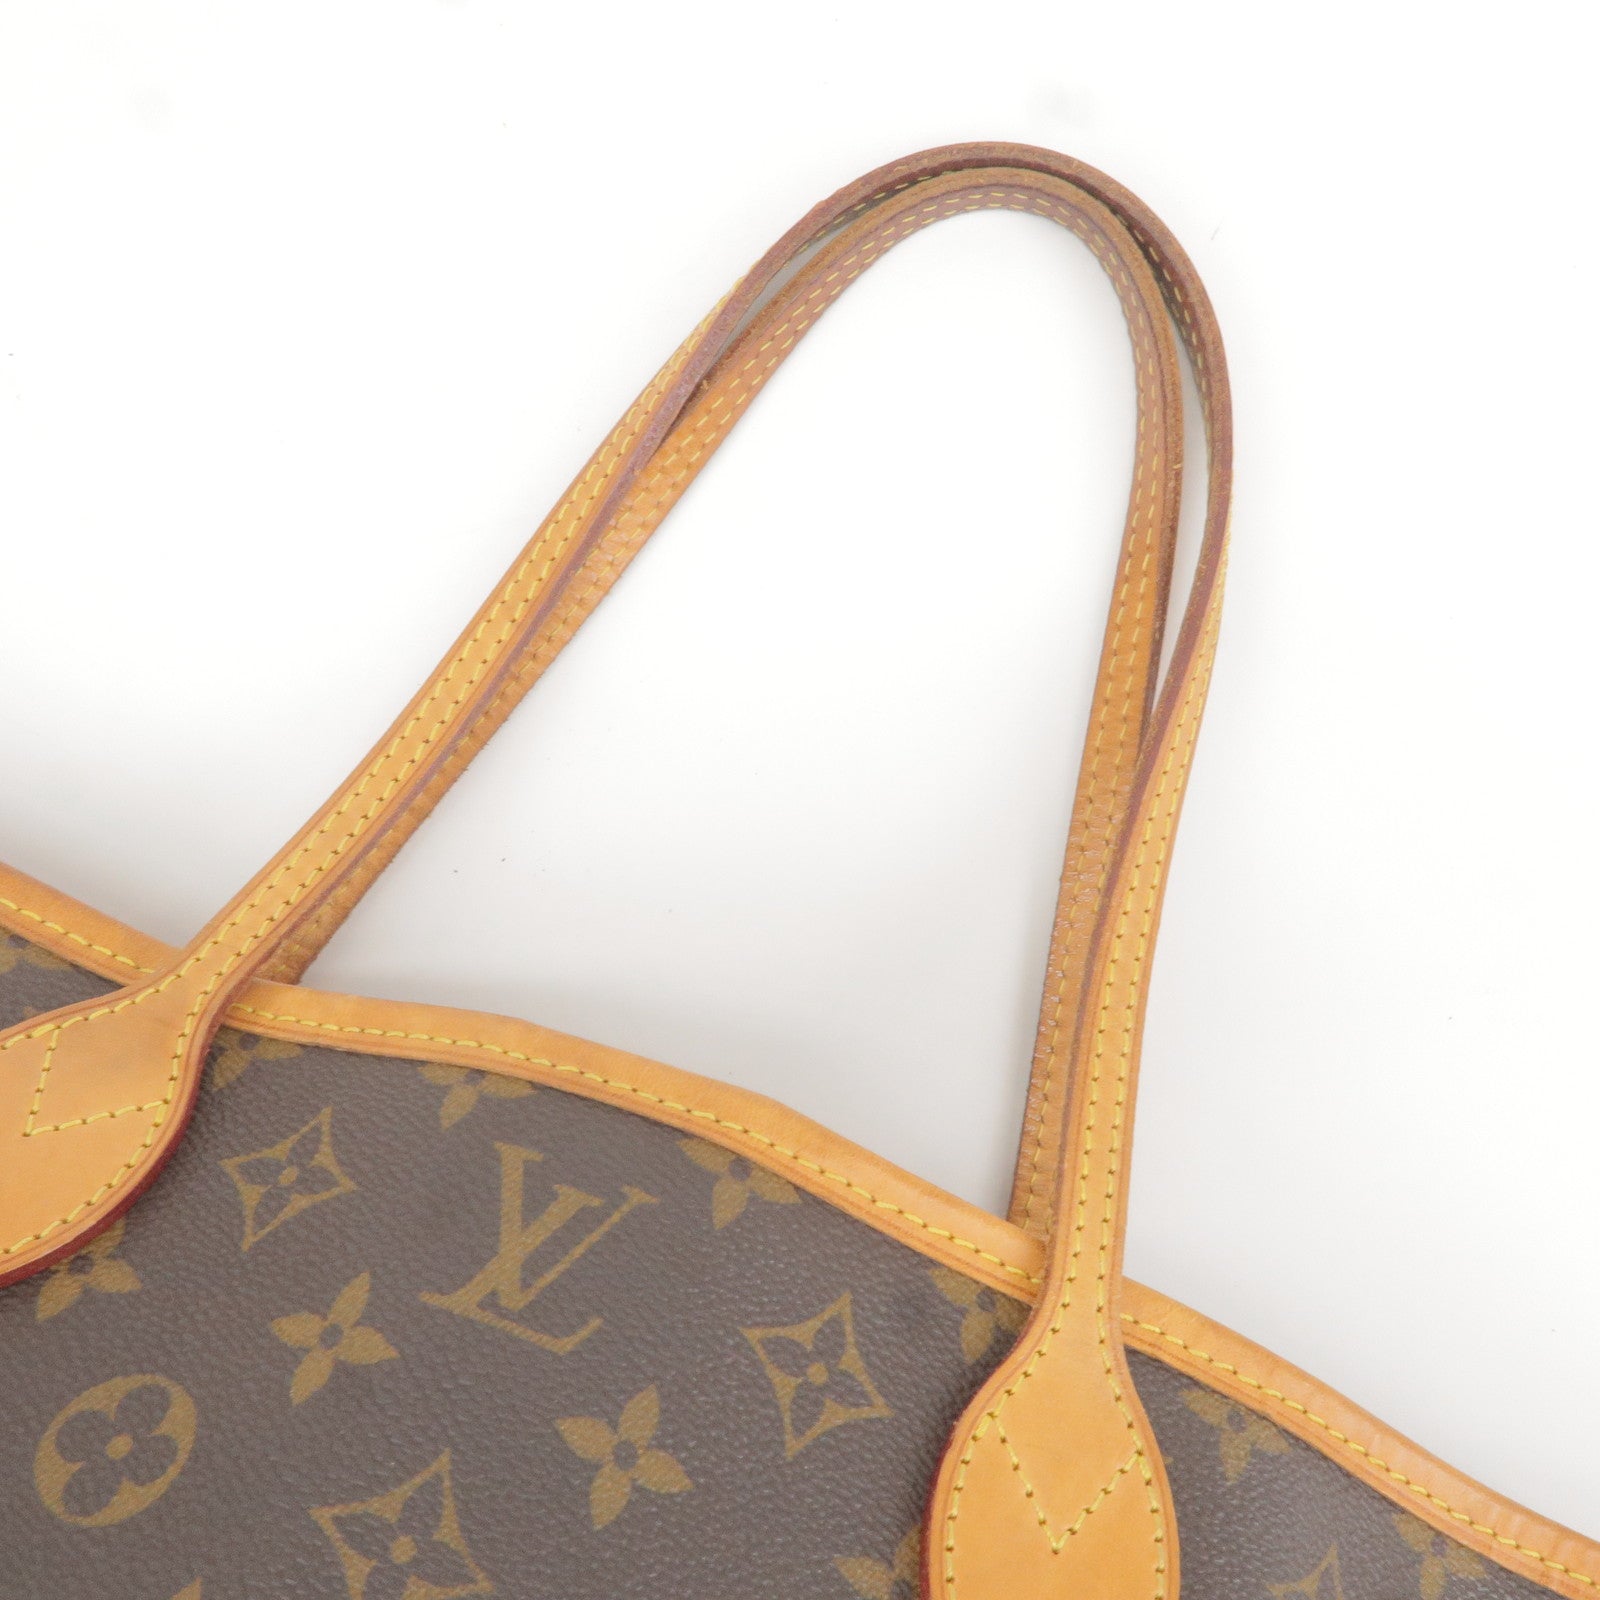 Pre-Owned Louis Vuitton Neverfull Monogram PM Brown 